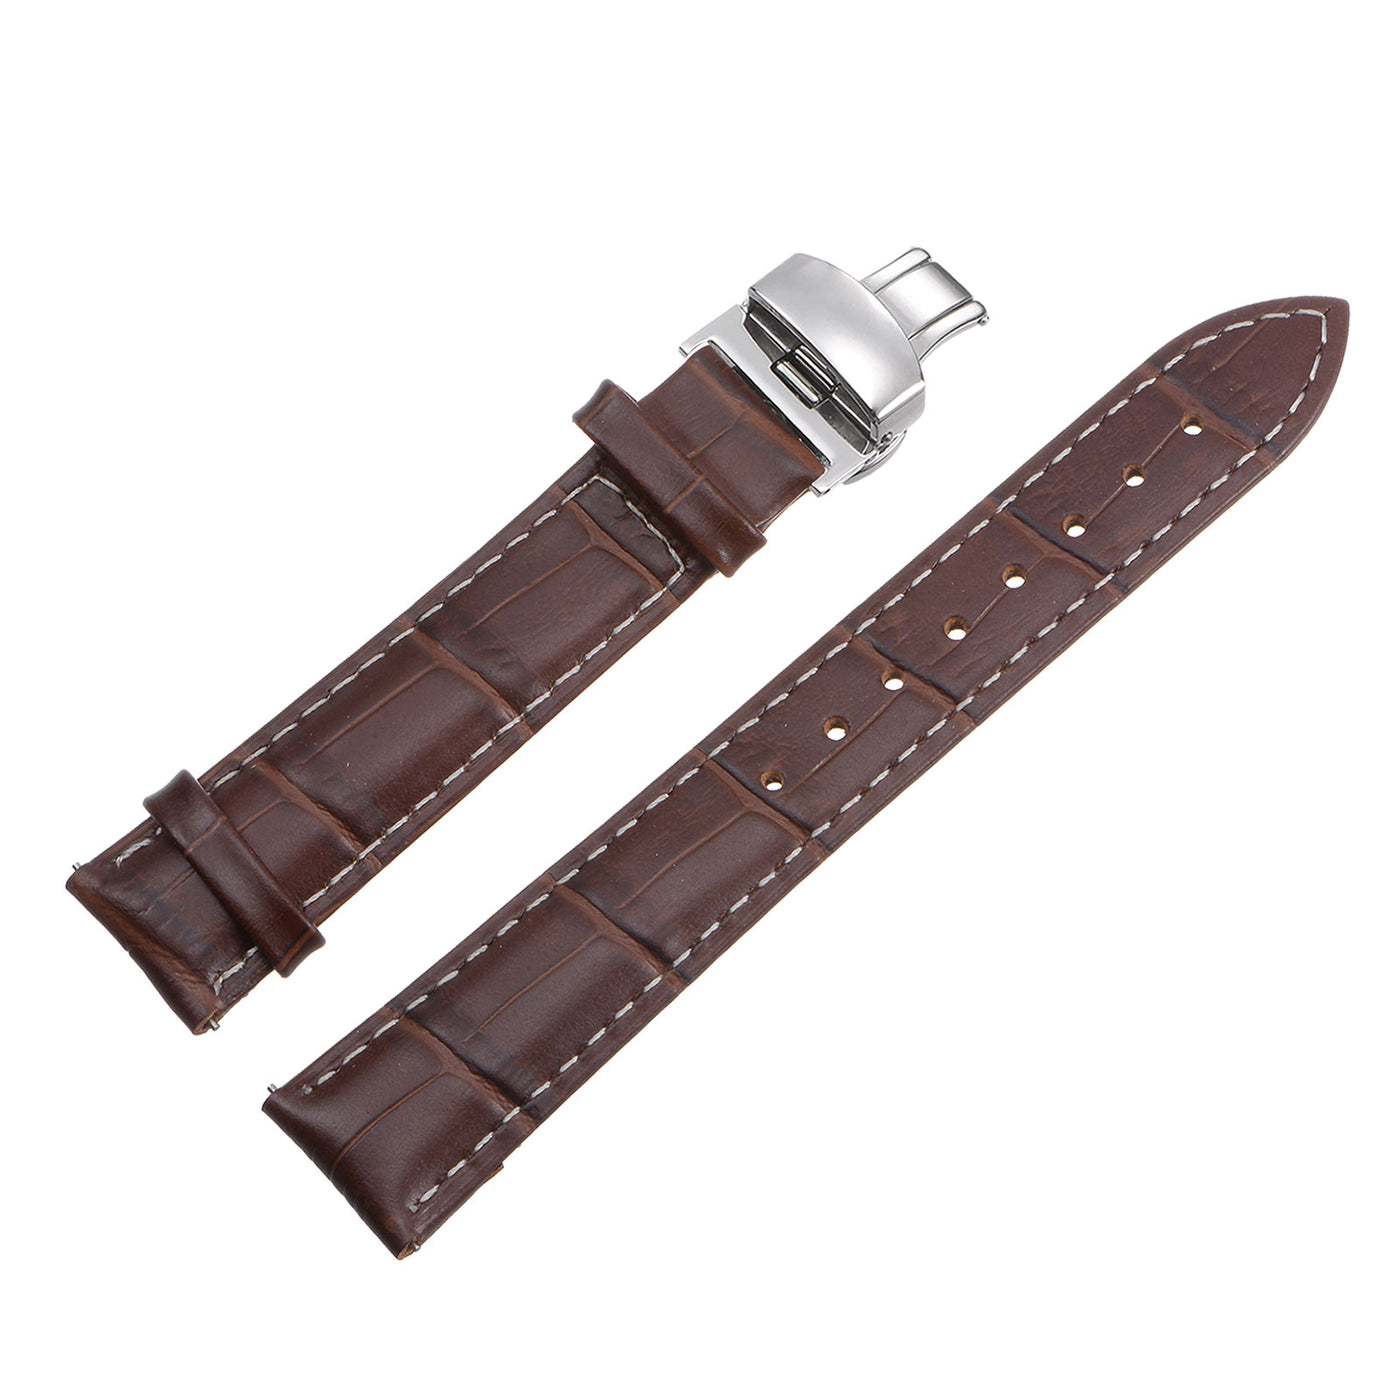 uxcell Uxcell Leather Band Deployment Buckle Watch Strap 19mm Leather Strap, Light Brown